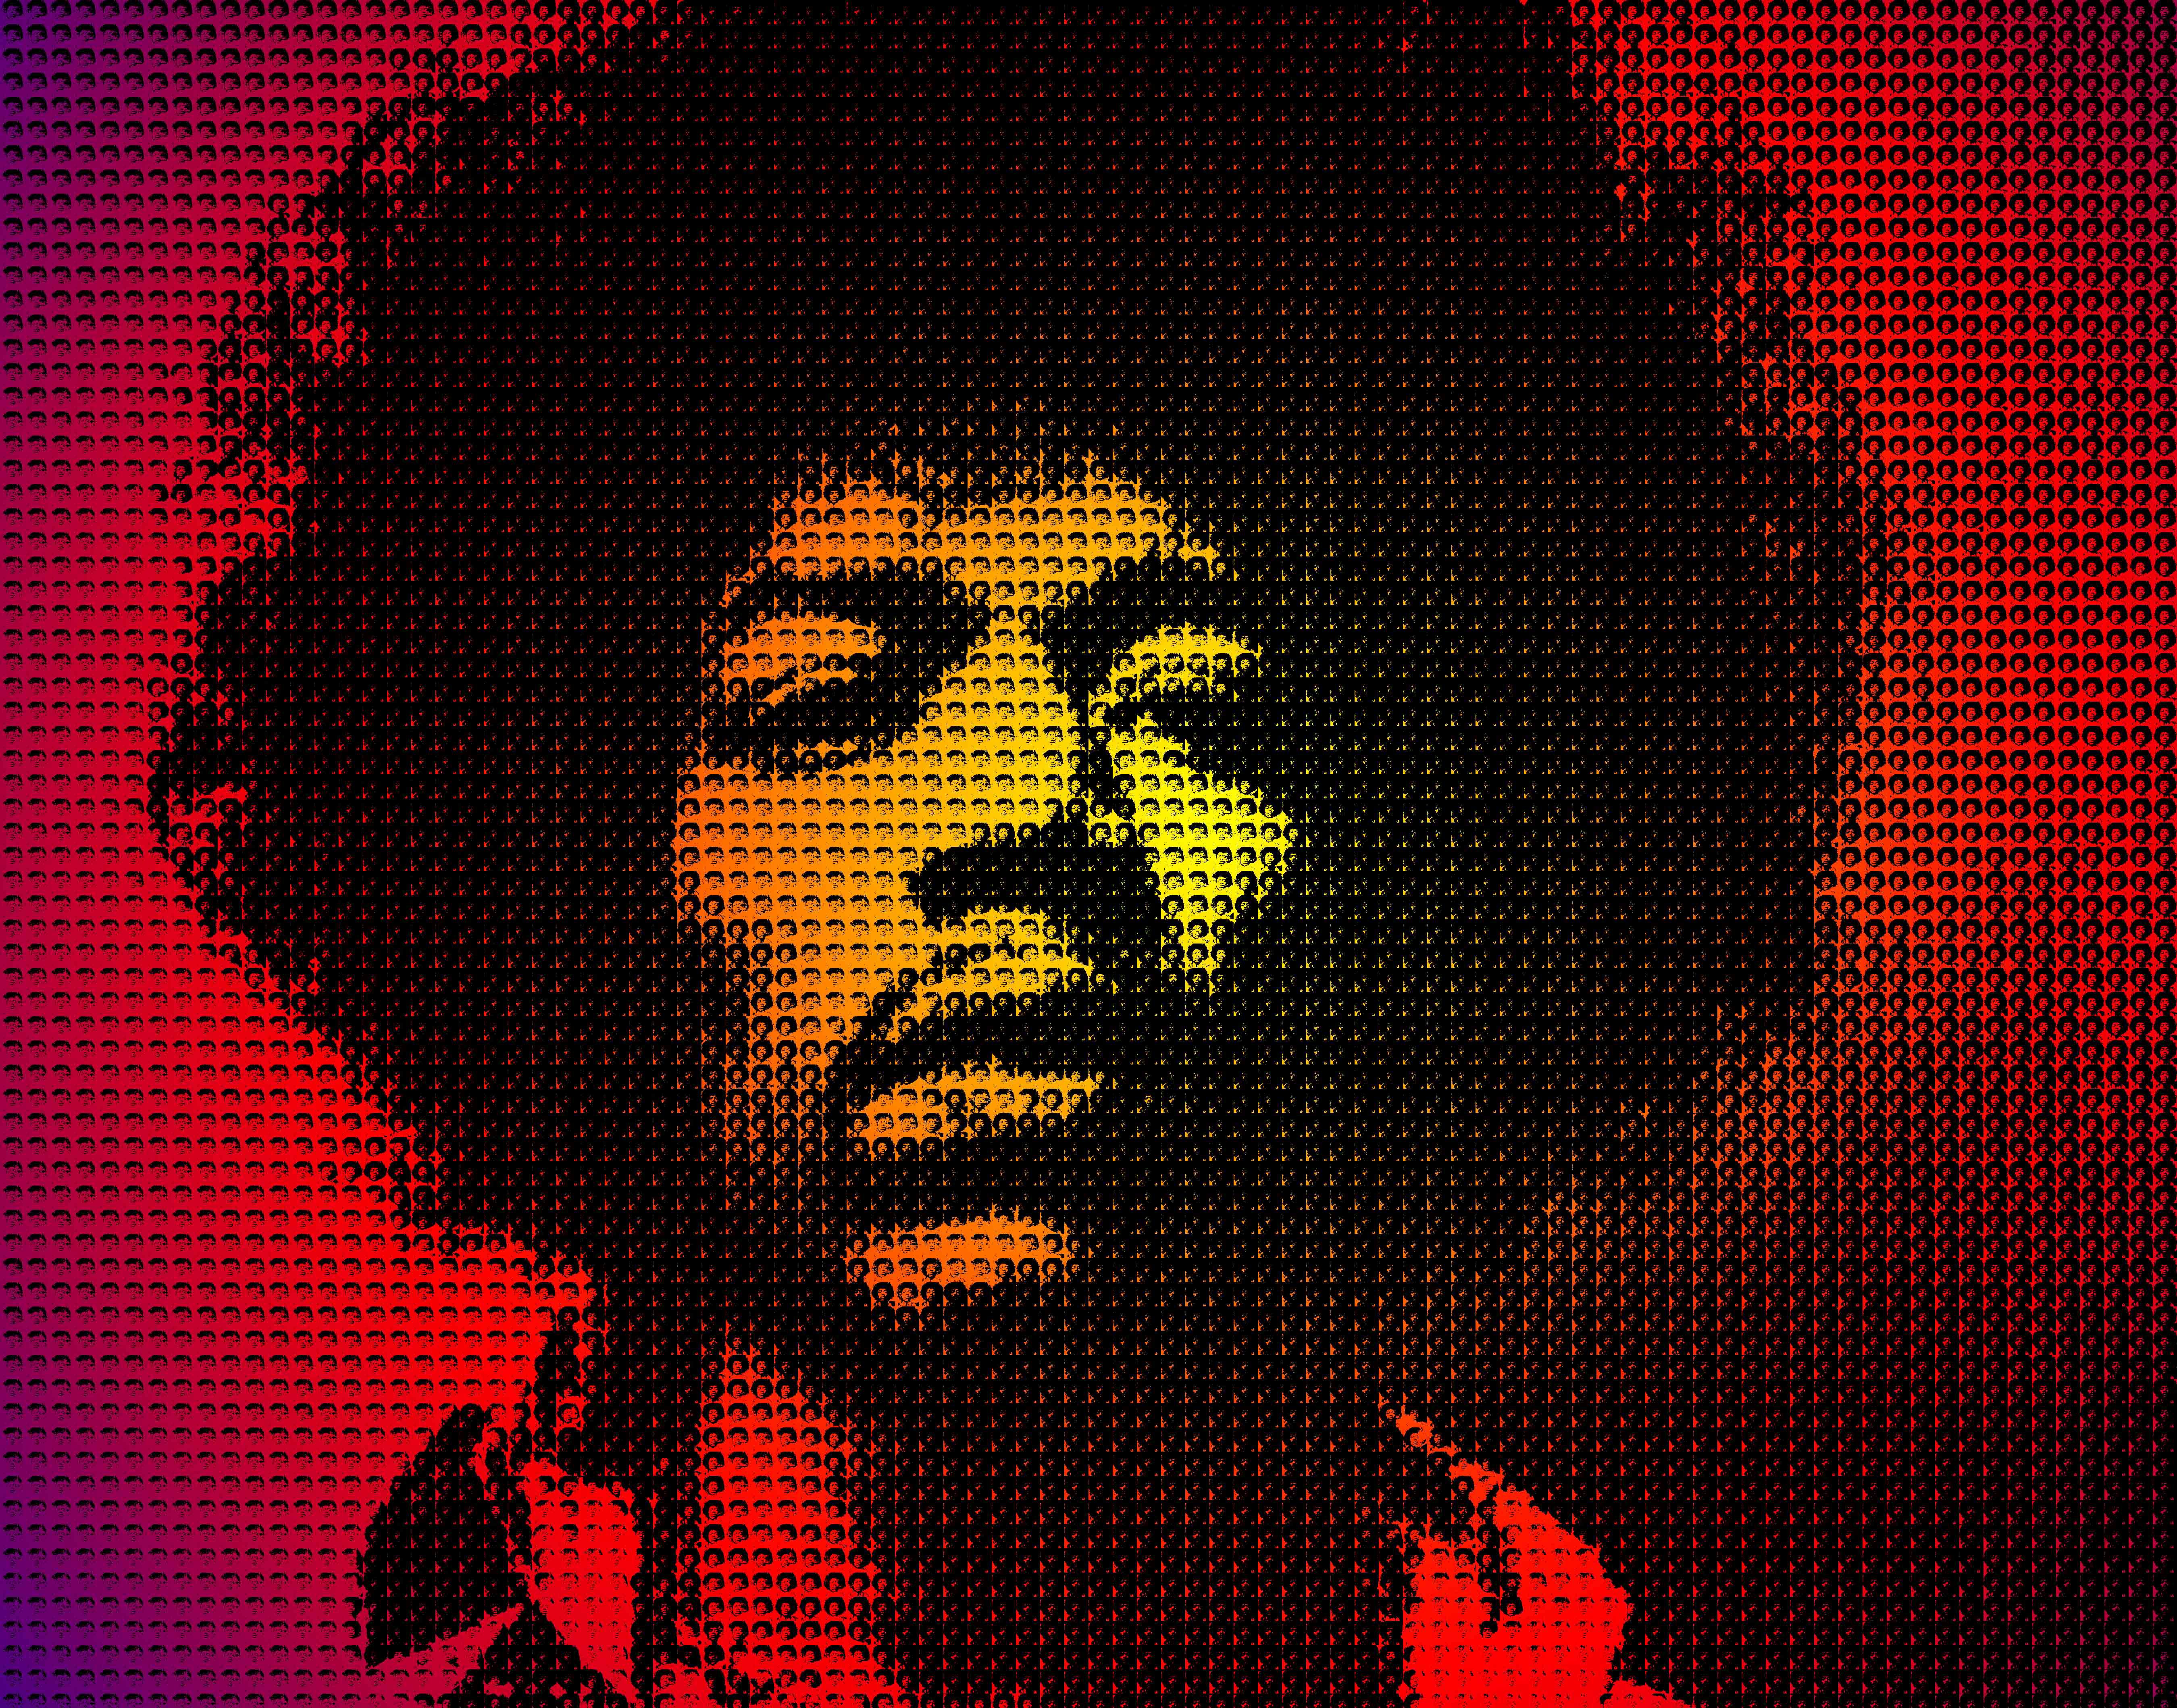 Jimi Hendrix Wallpaper Image Photos Pictures Background